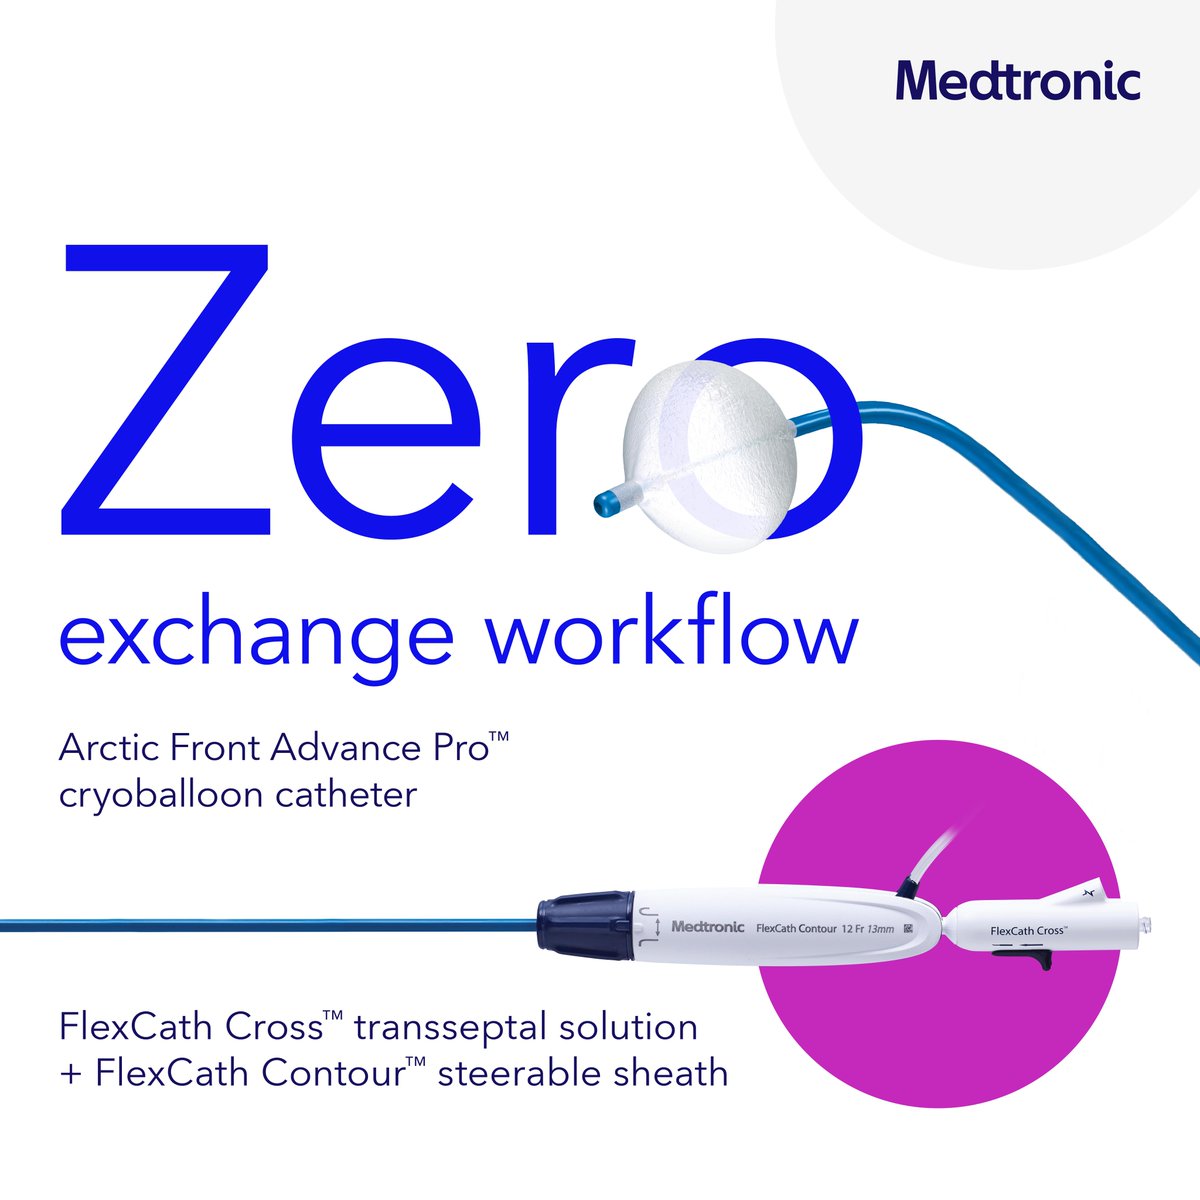 The FlexCath Cross™ system is the only zero exchange workflow supporting the leading cryoballoon on the market. See risk/benefit info: bit.ly/3Vev8ik Learn more: bit.ly/3wCIdbI